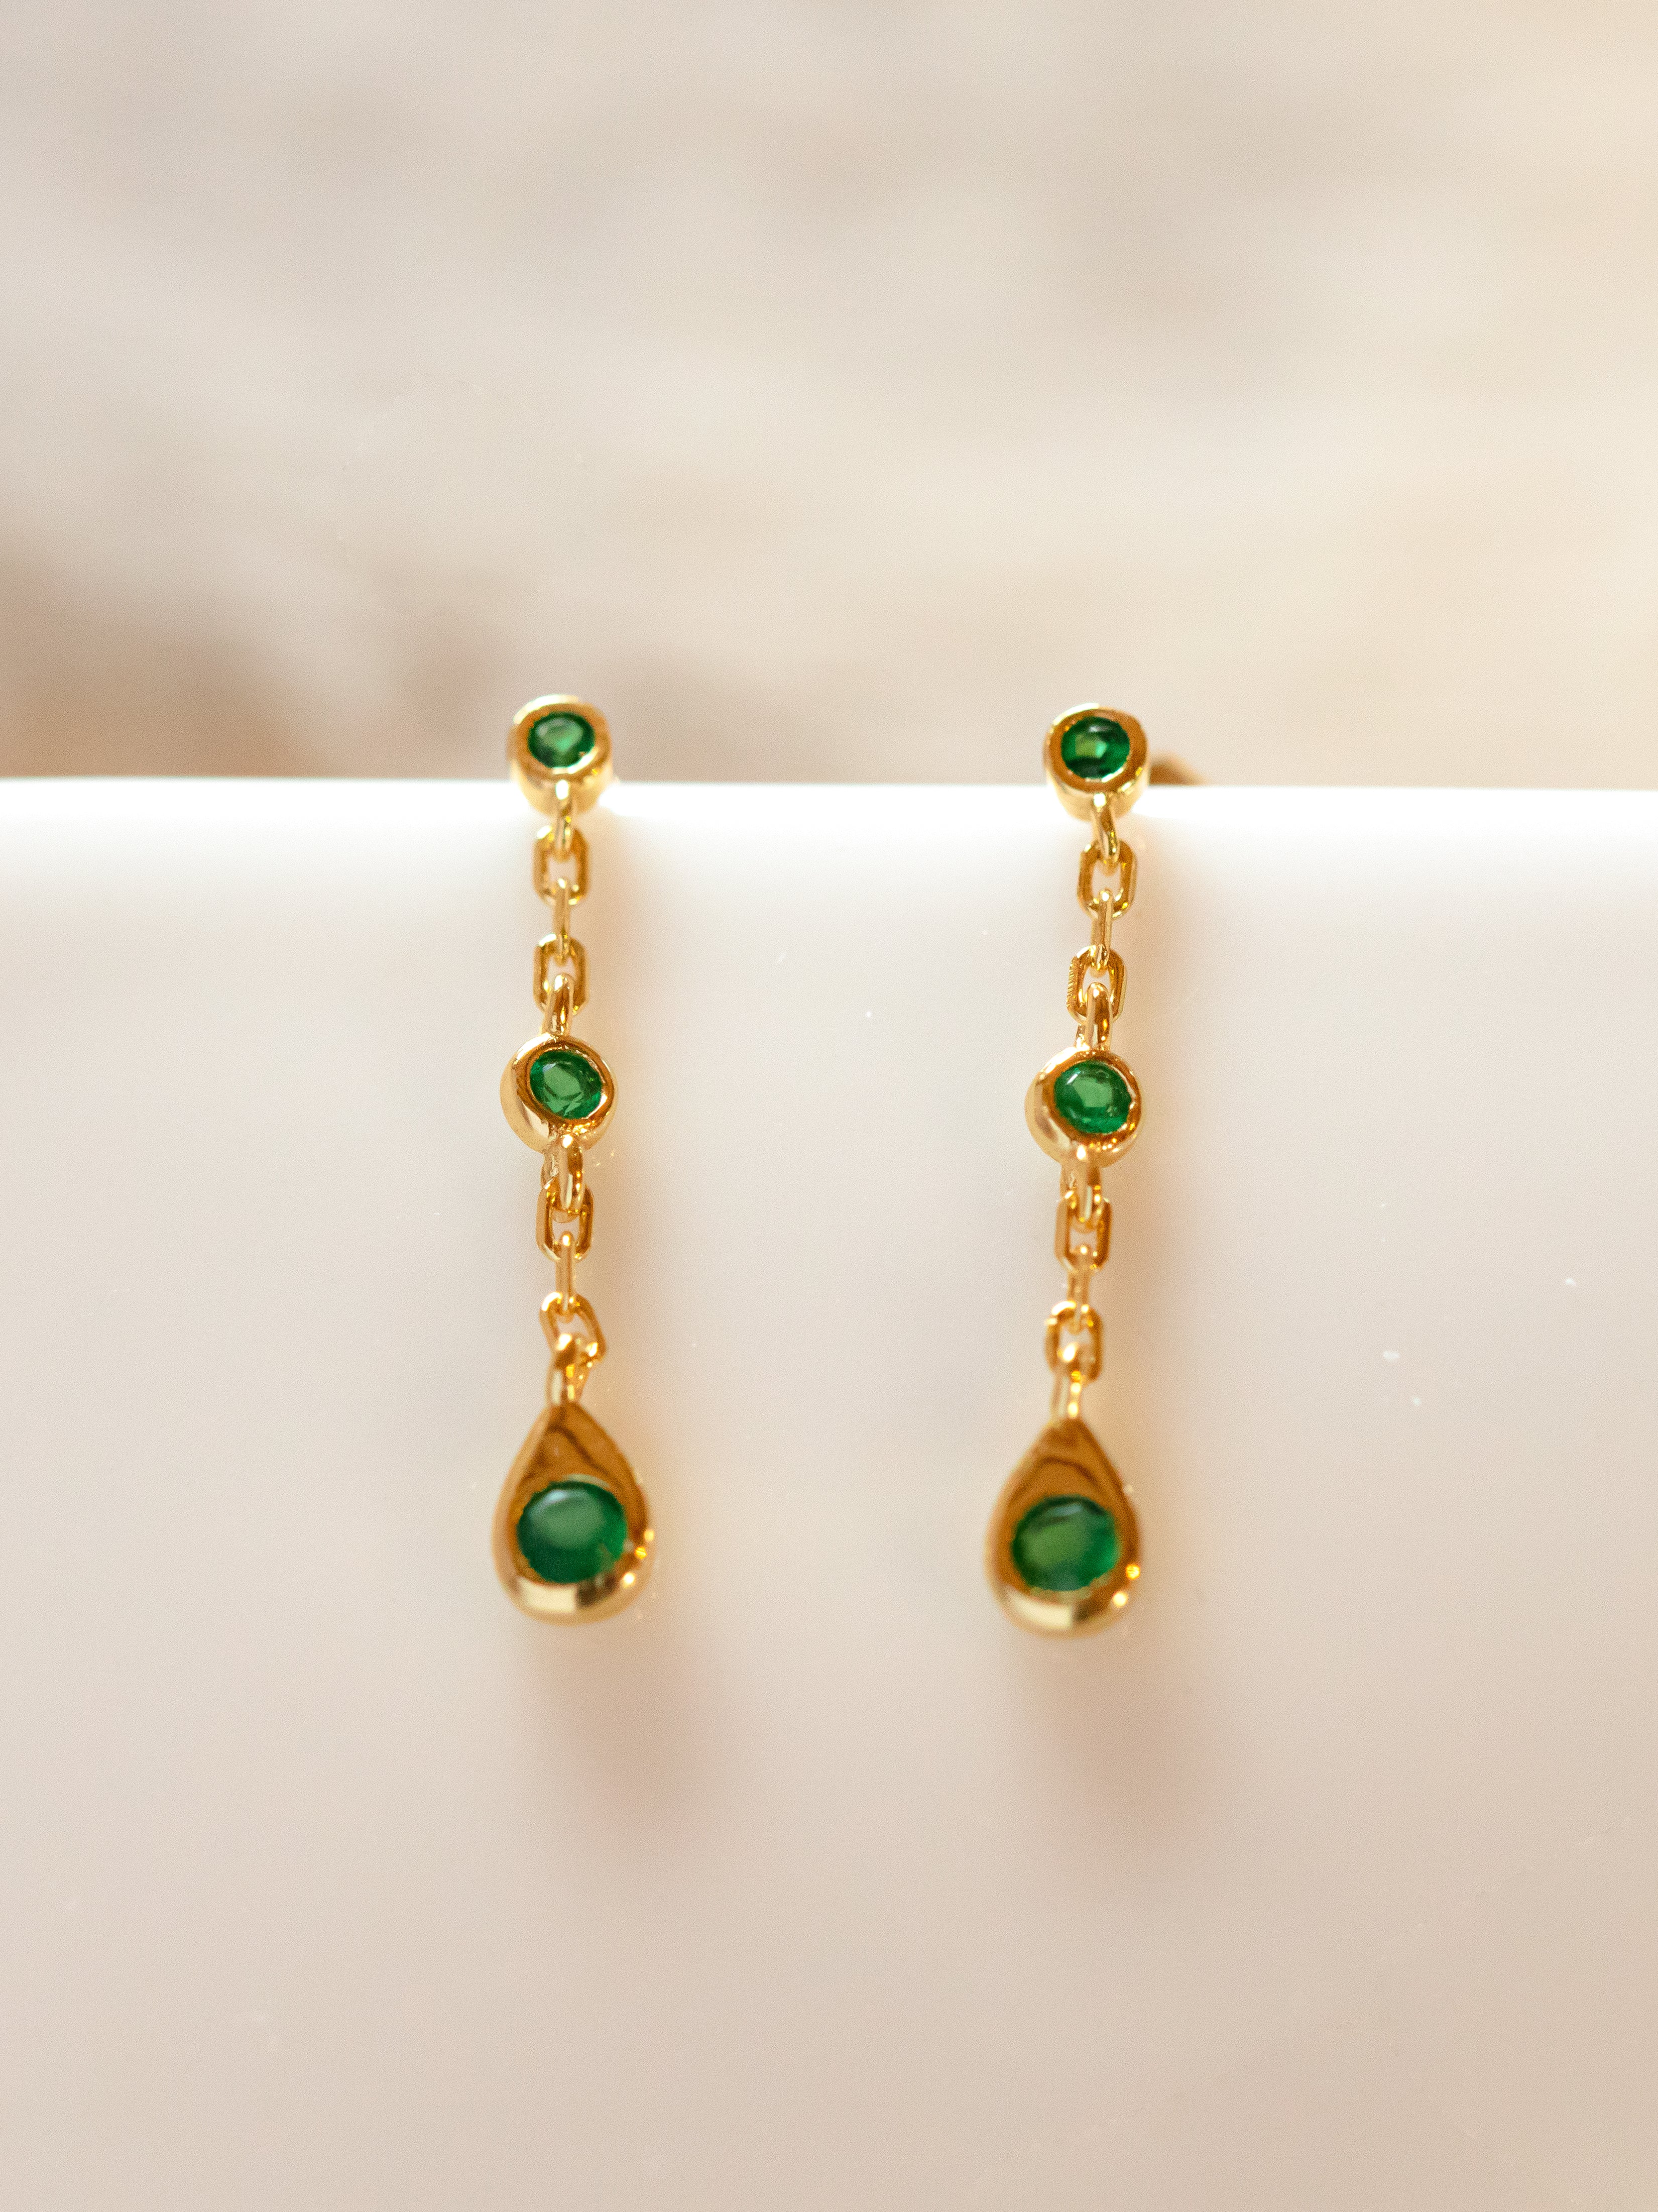 Gold Dangle Chain Earrings With Emerald Green Stones